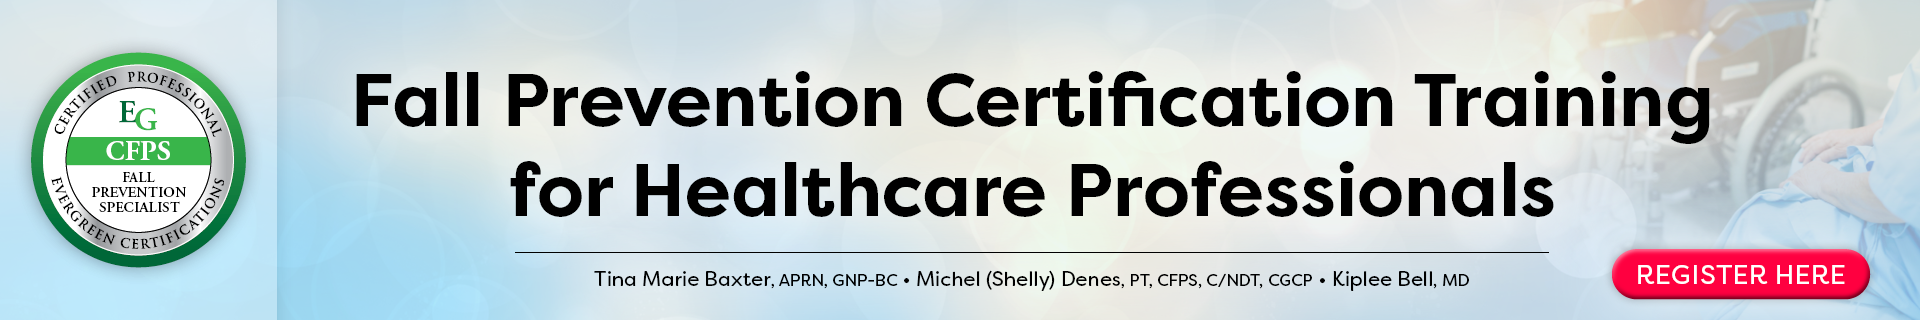 Fall Prevention Certification Training for Healthcare Professionals